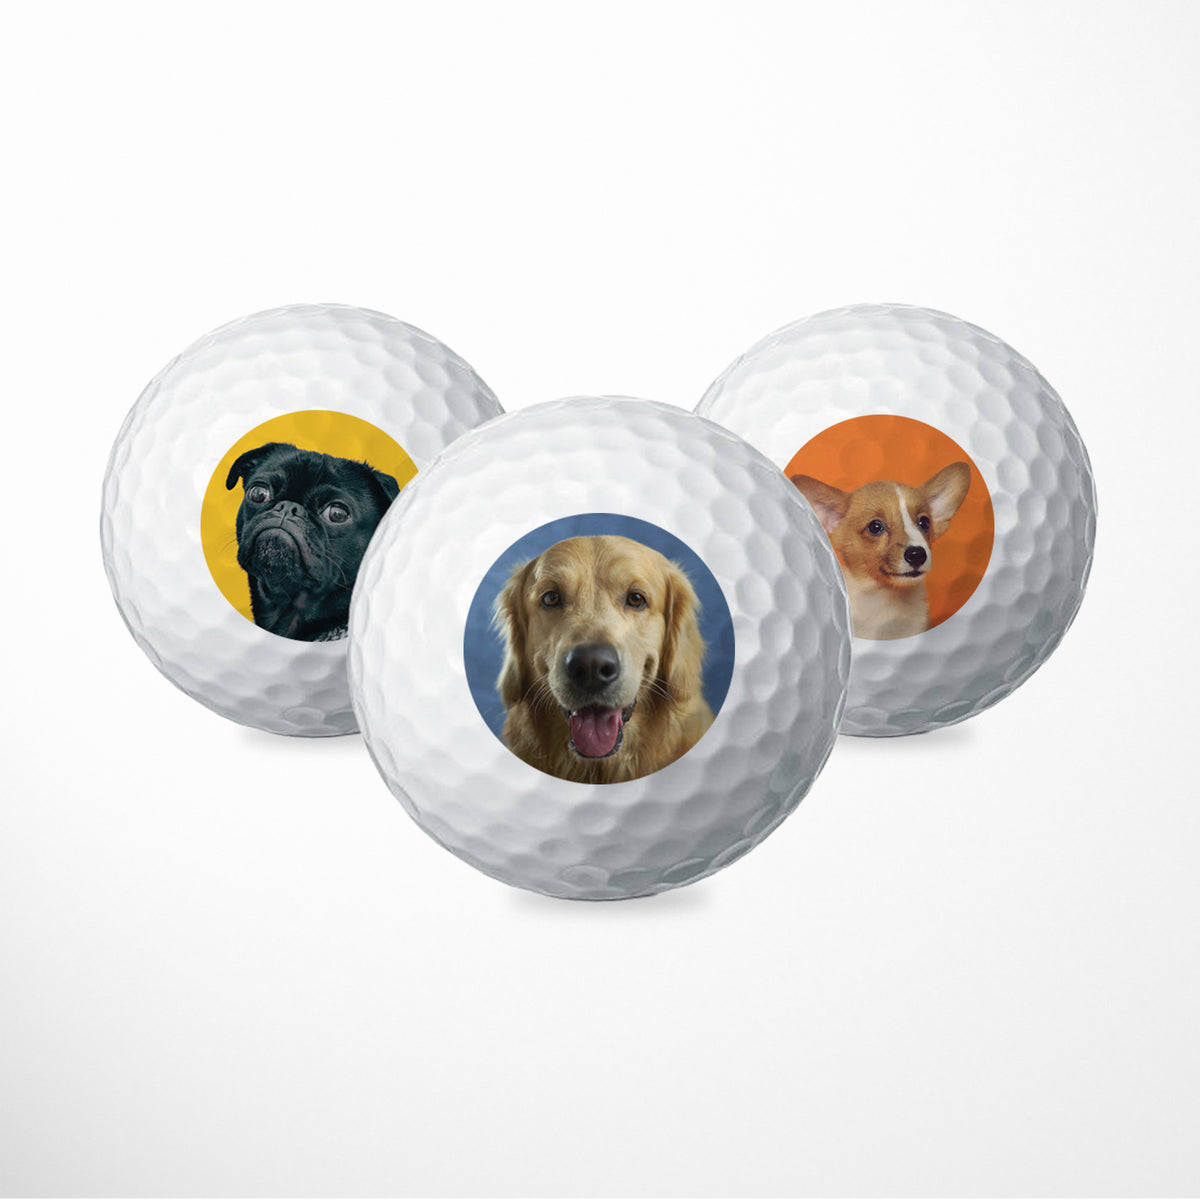 Pet face custom printed golf balls with your pet photo, Golf gift idea / Real golf balls printed / Set of 3, 6, 9 or 12